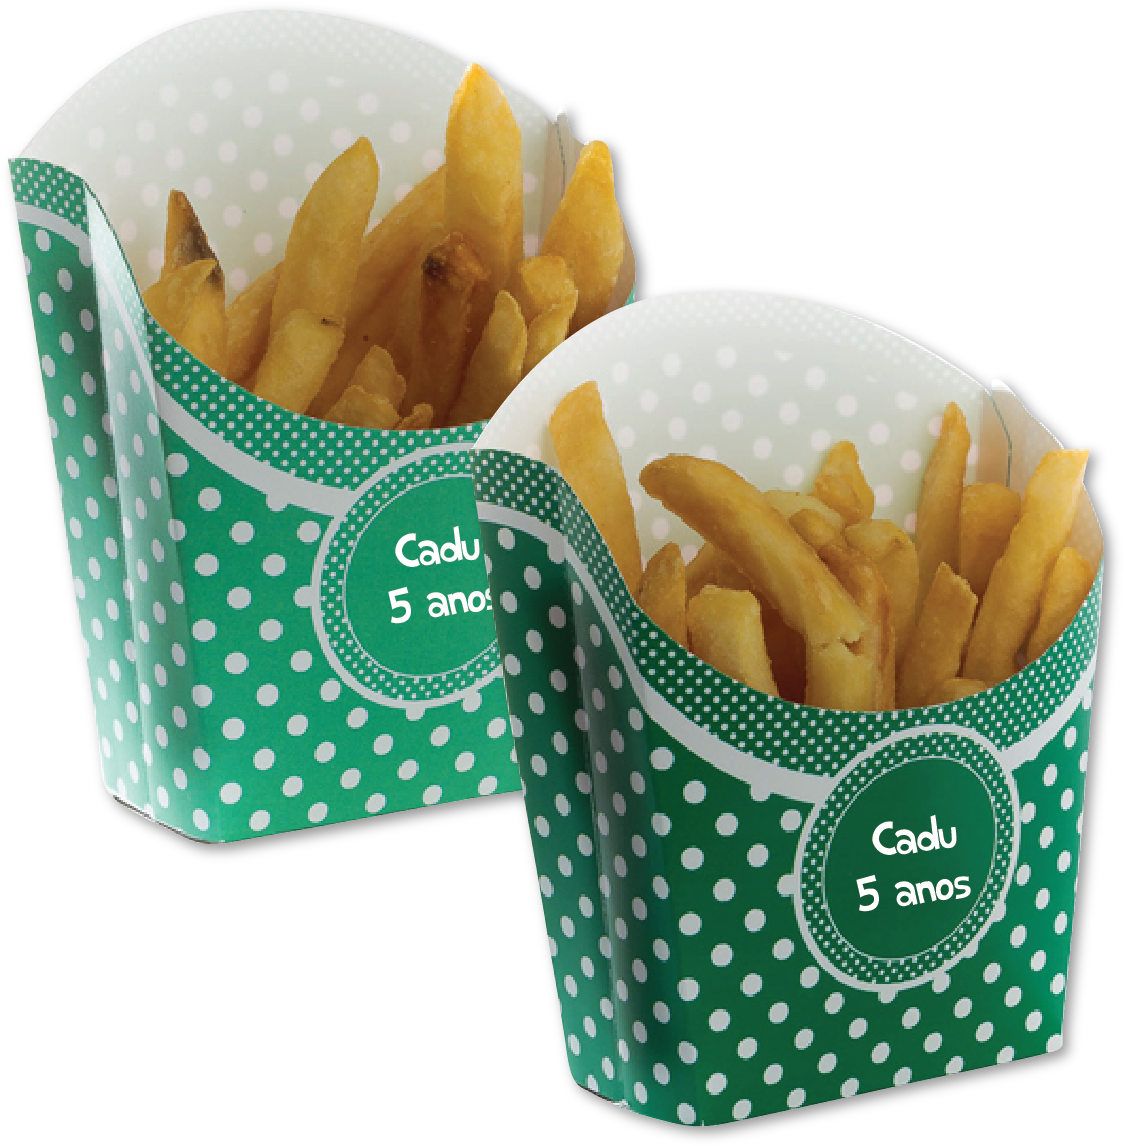 French Fries In Green And White Containers